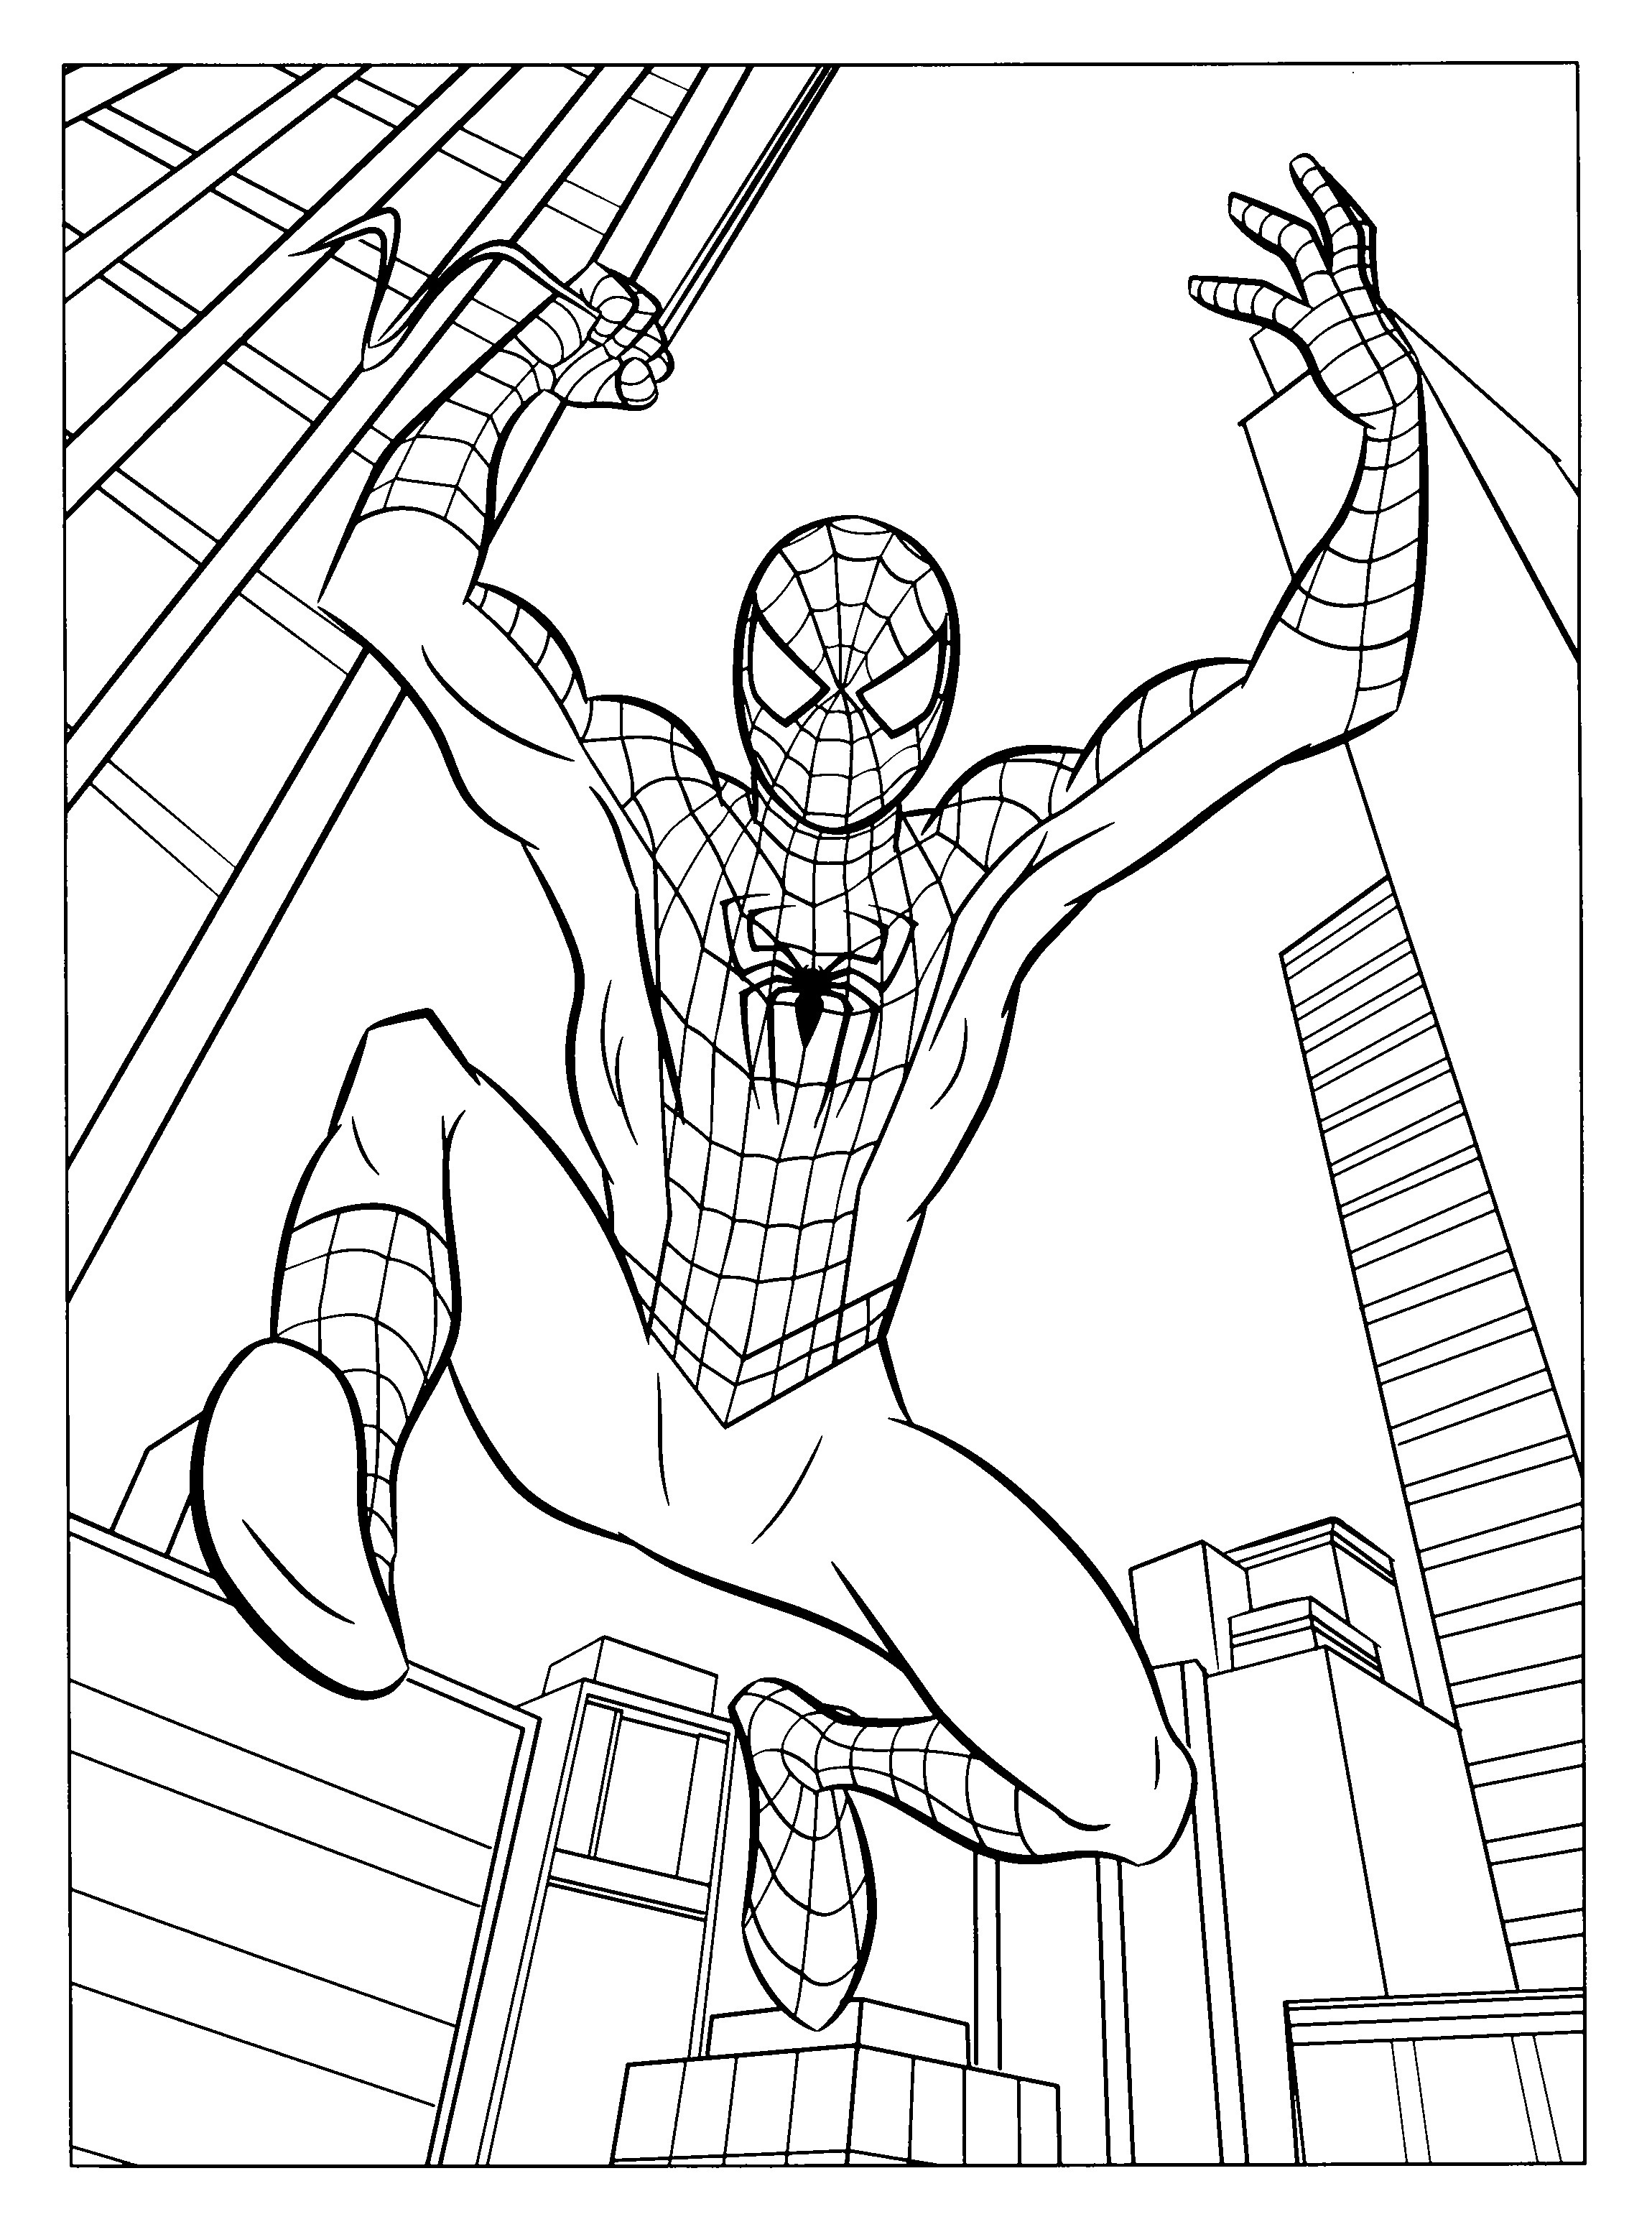 Free Printable Spiderman Coloring Pages For Kids - Free Printable Spiderman Coloring Pages